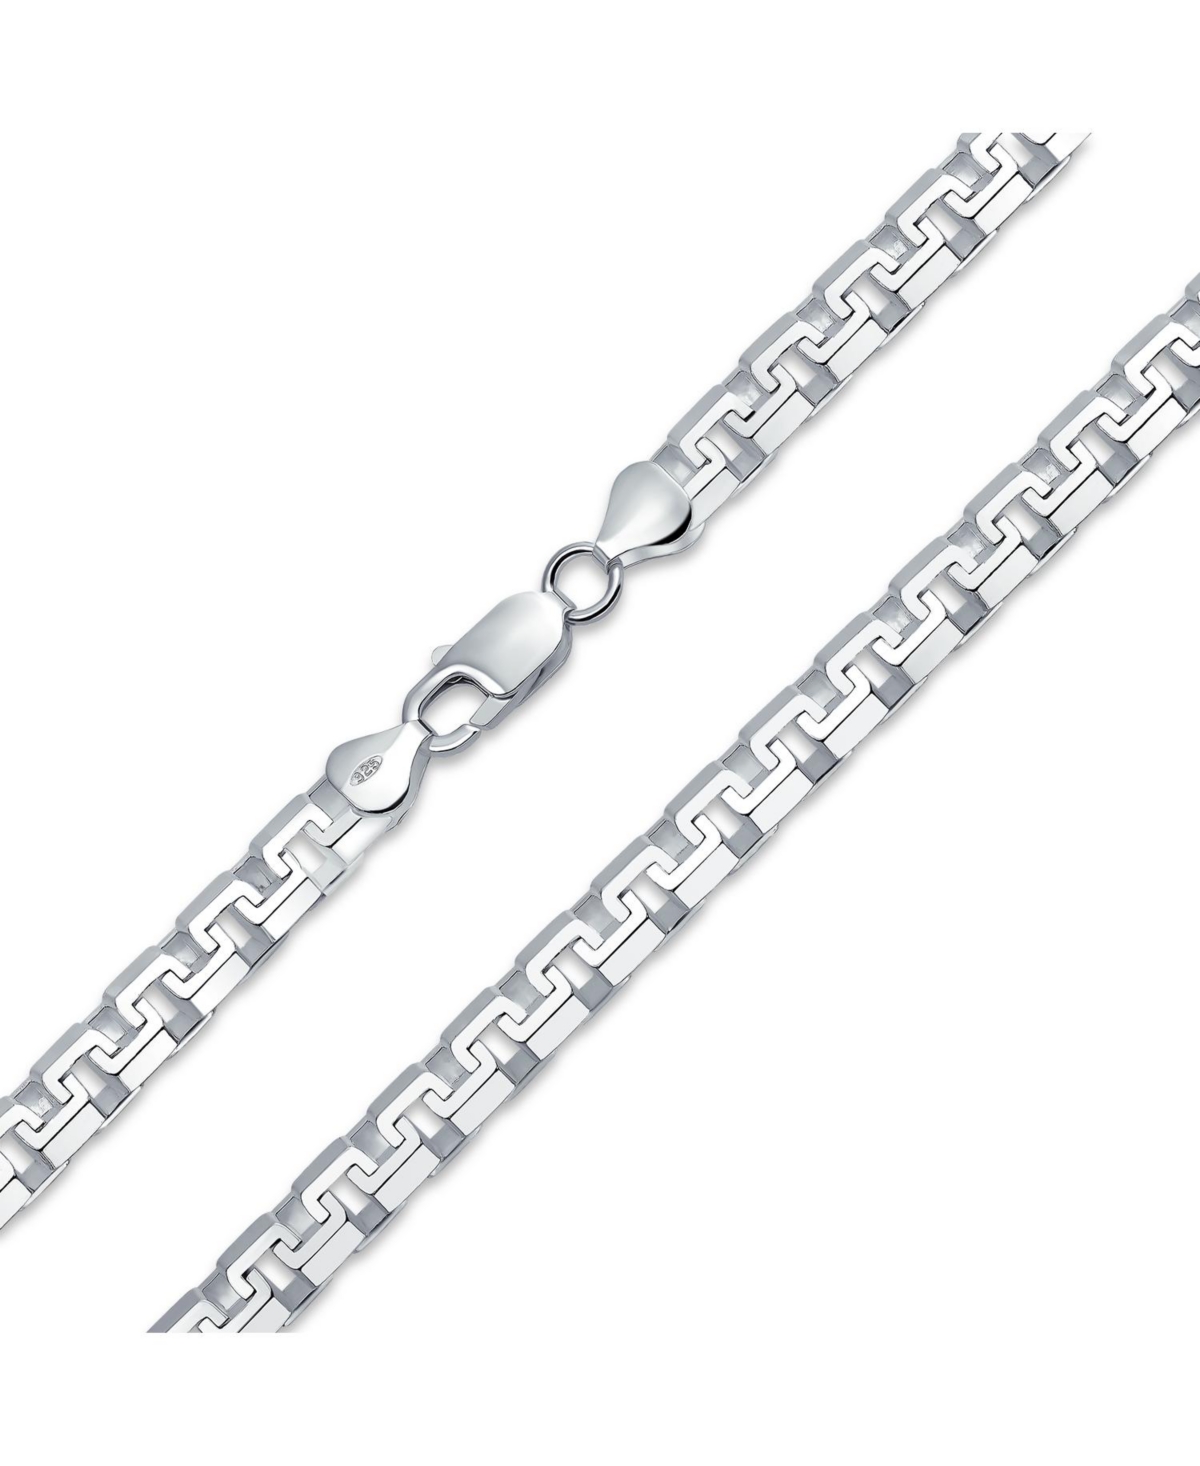 Men's 6.5 Thick Heavy Solid Franco Square Chain Link Necklace For Men Greek Key Design For Men .925 Sterling Silver 20" Inch Made In Ita